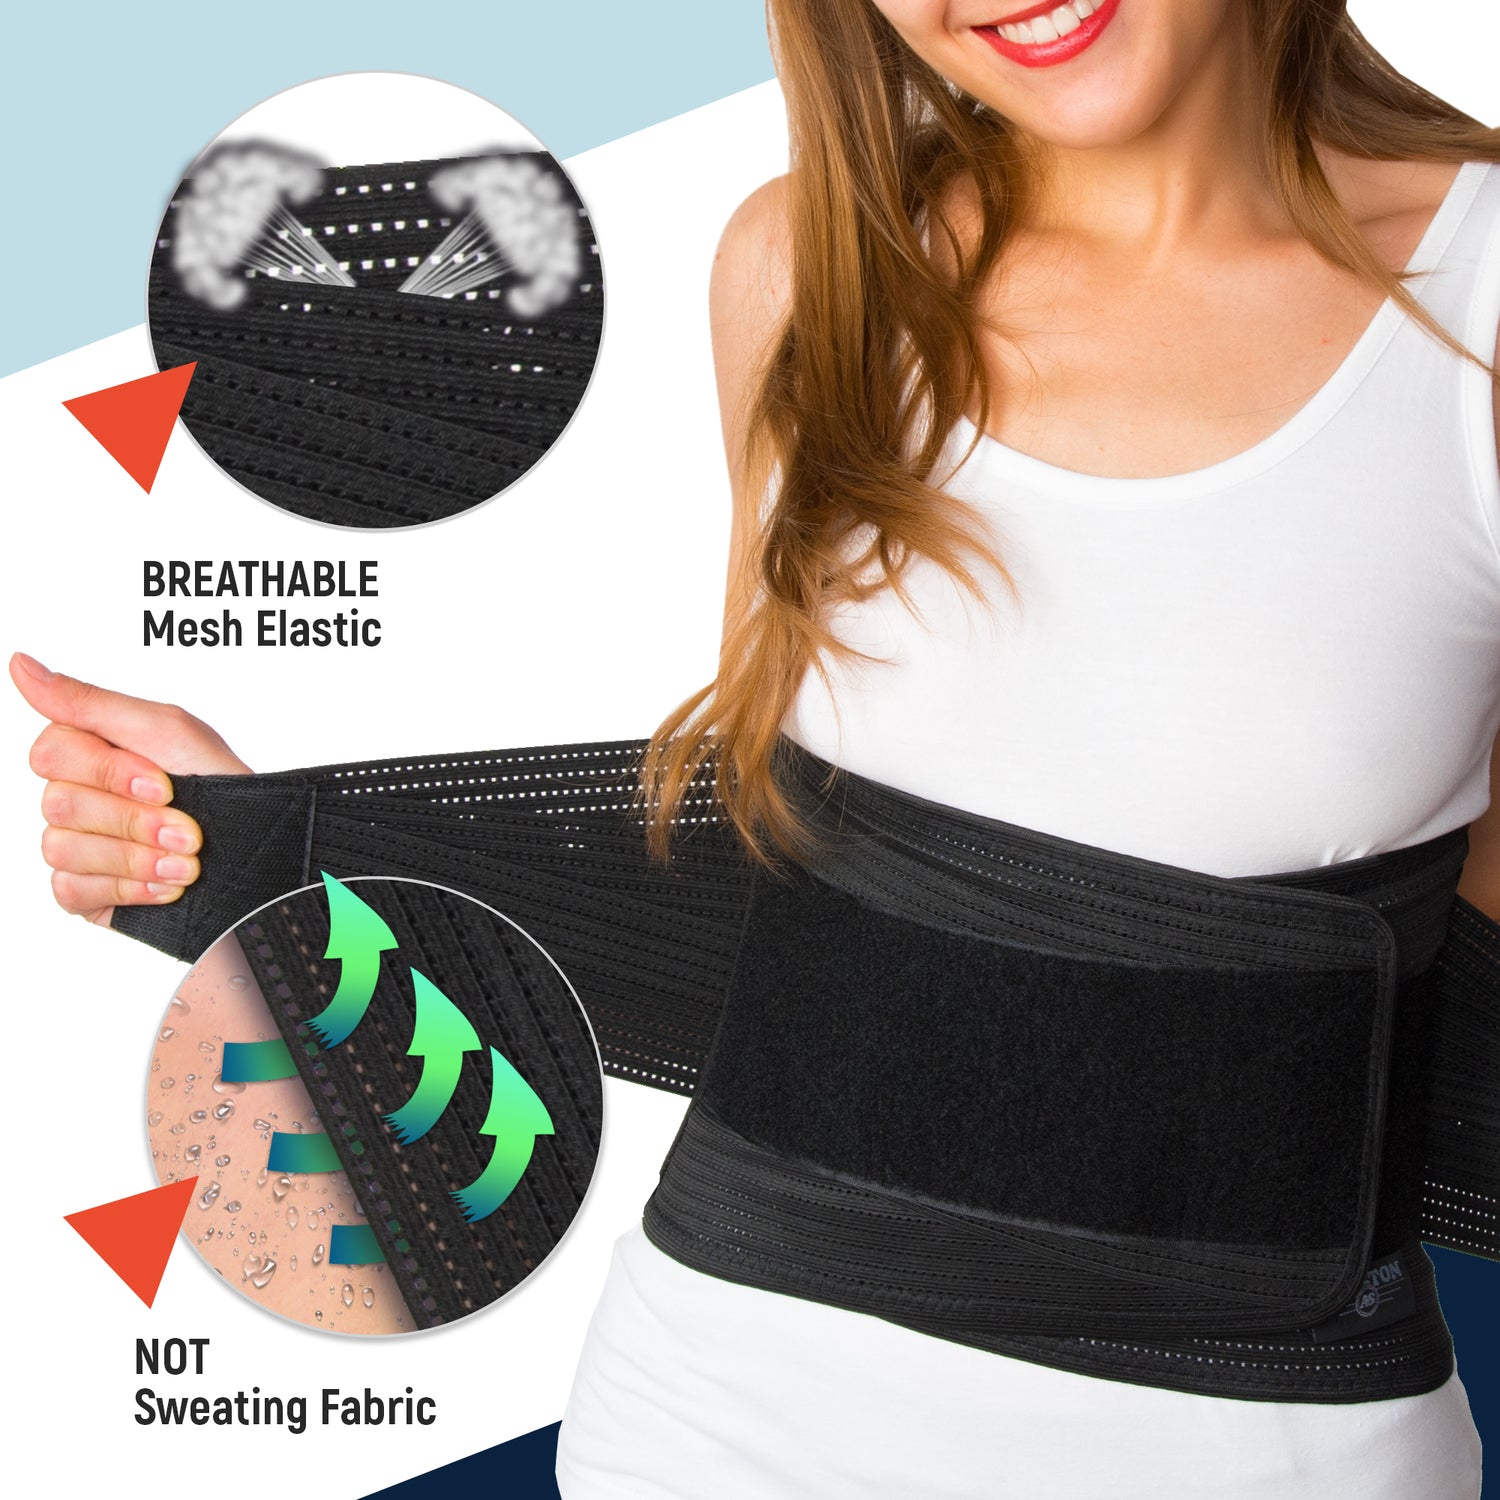 AVESTON® Back Brace for Lower Back Pain Relief with Lumbar Pad Support